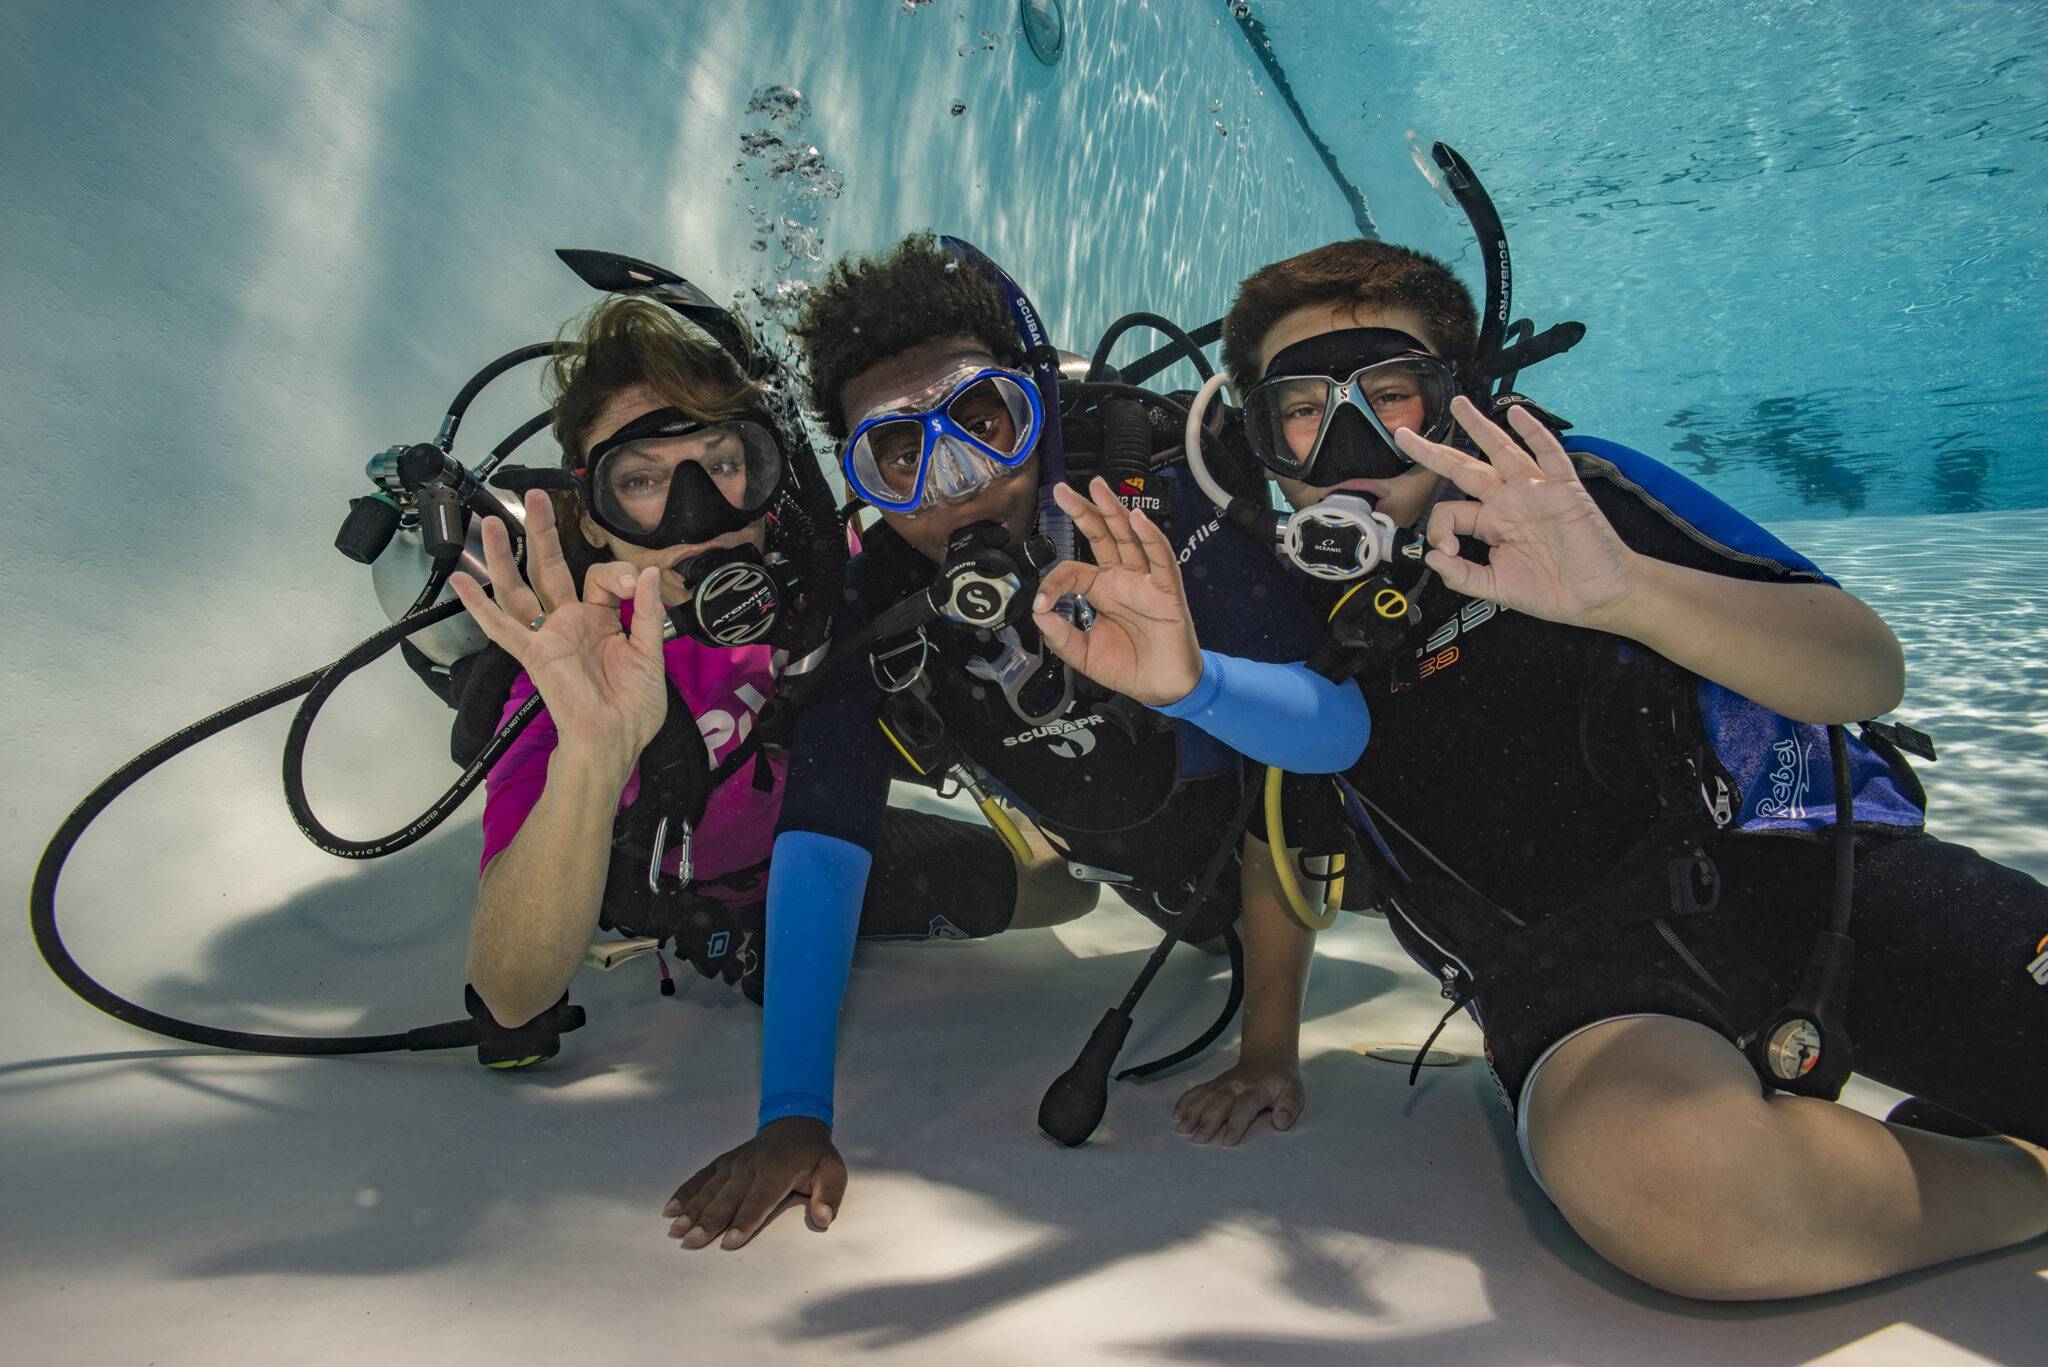 Kids learning to scuba dive in a pool